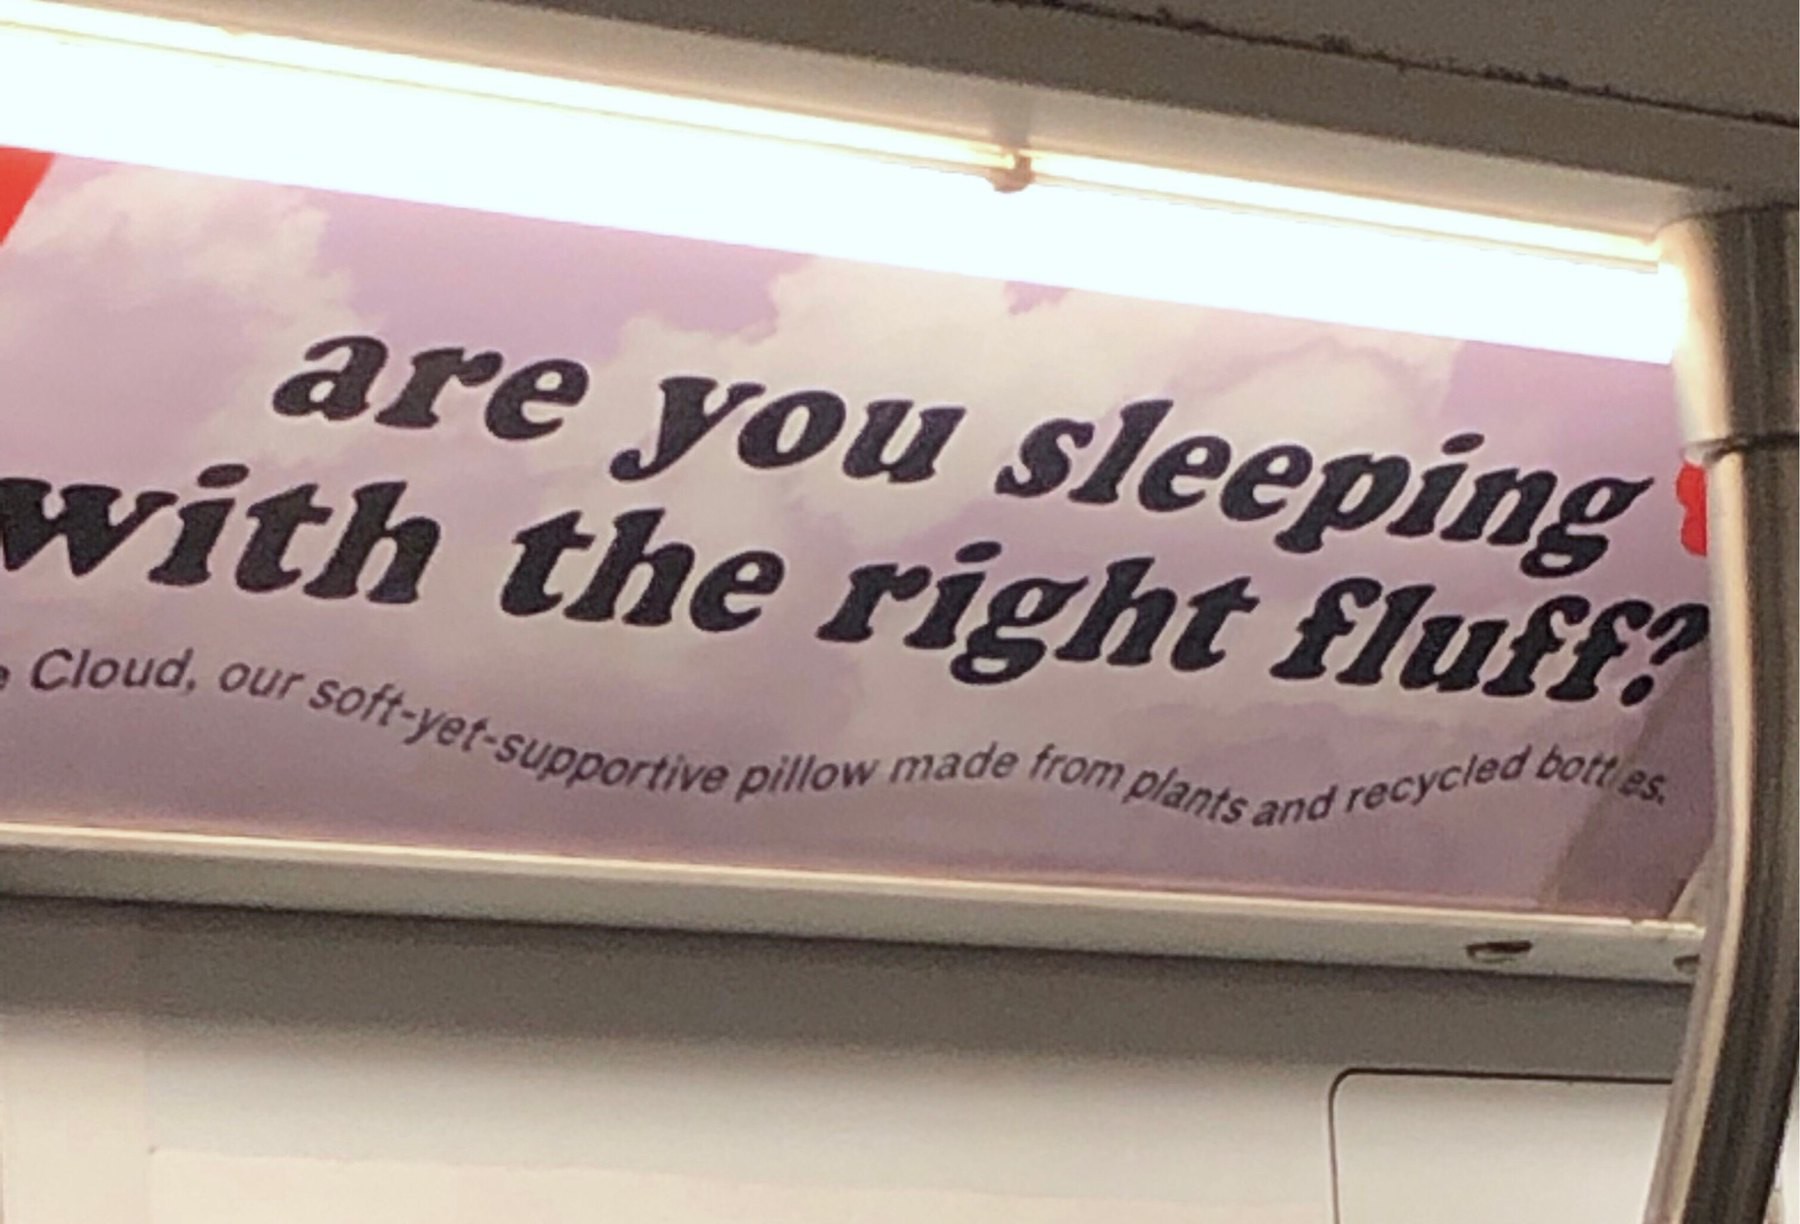 Subway ad saying "are you sleeping with the right fluff?"